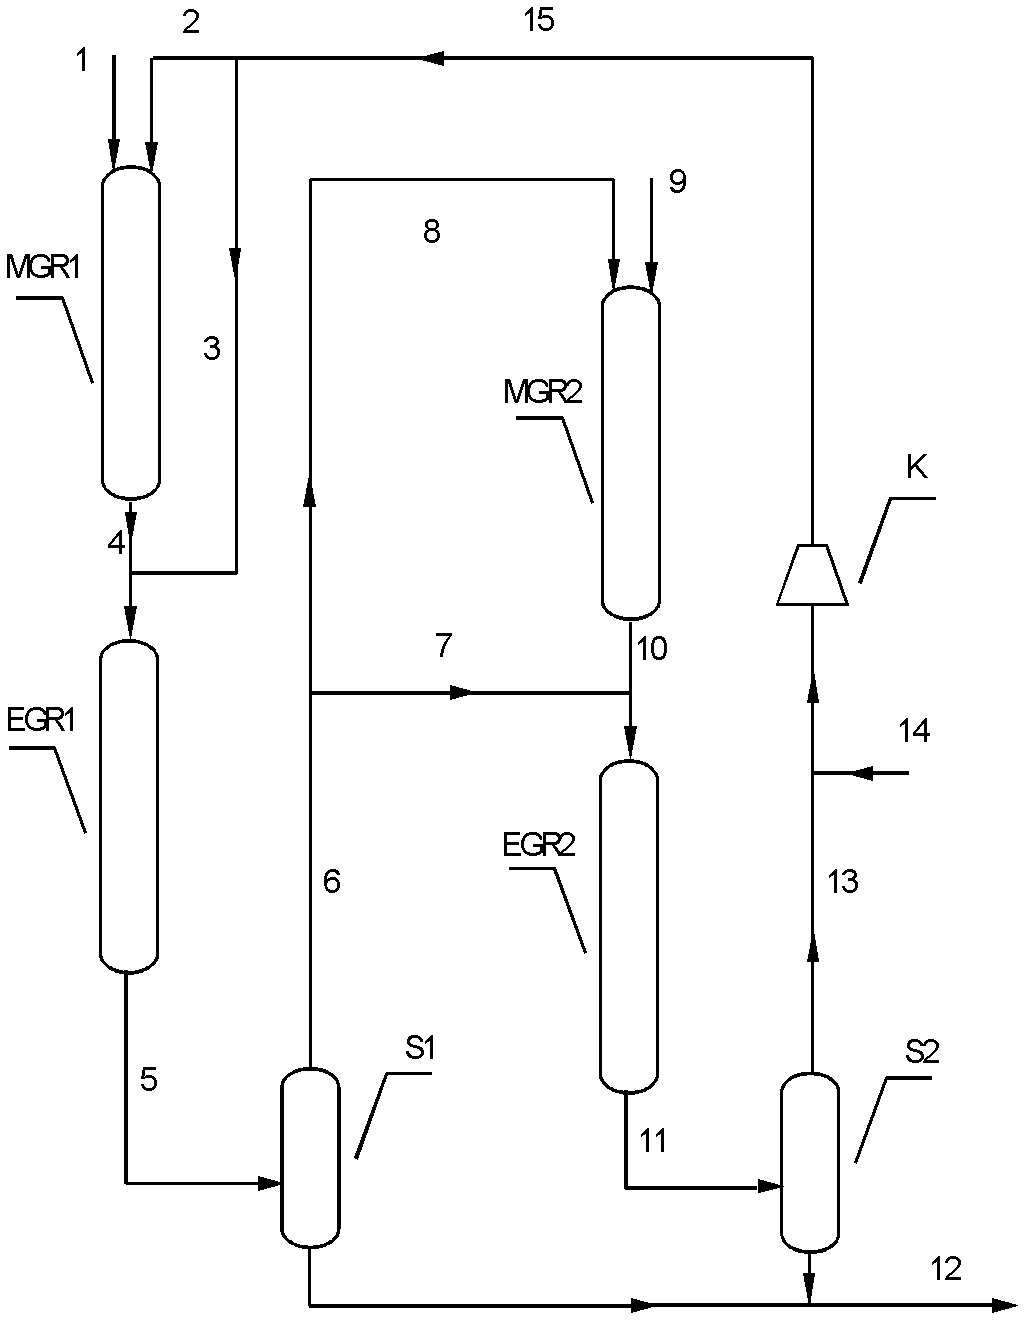 Method for generating glycol through two-step catalytic hydrogenation reaction of oxalate